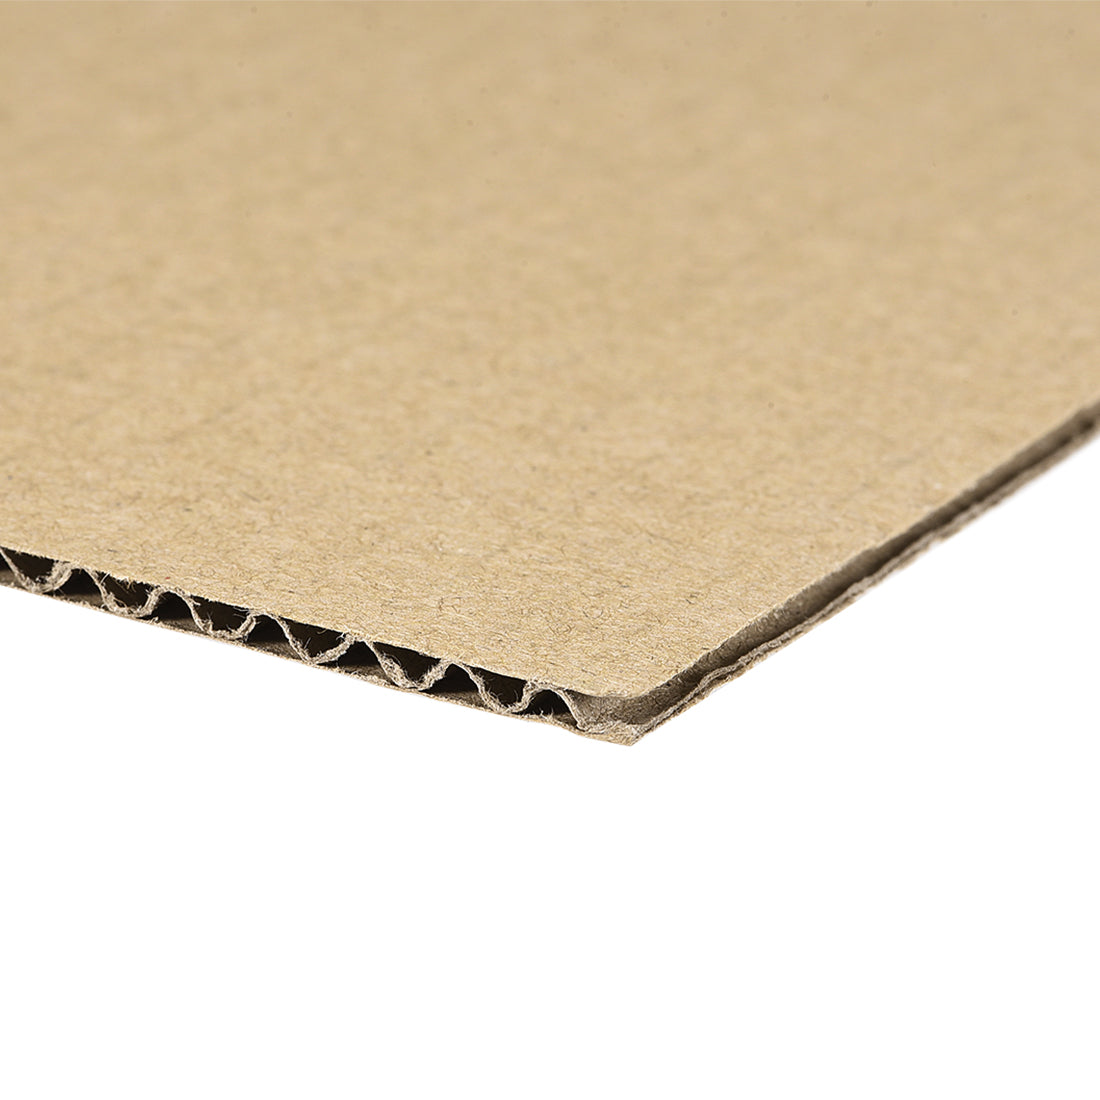 uxcell Uxcell Corrugated Cardboard Filler Insert Sheet Pads 3-Layer 3mm x 12 x 16-Inch 4pcs